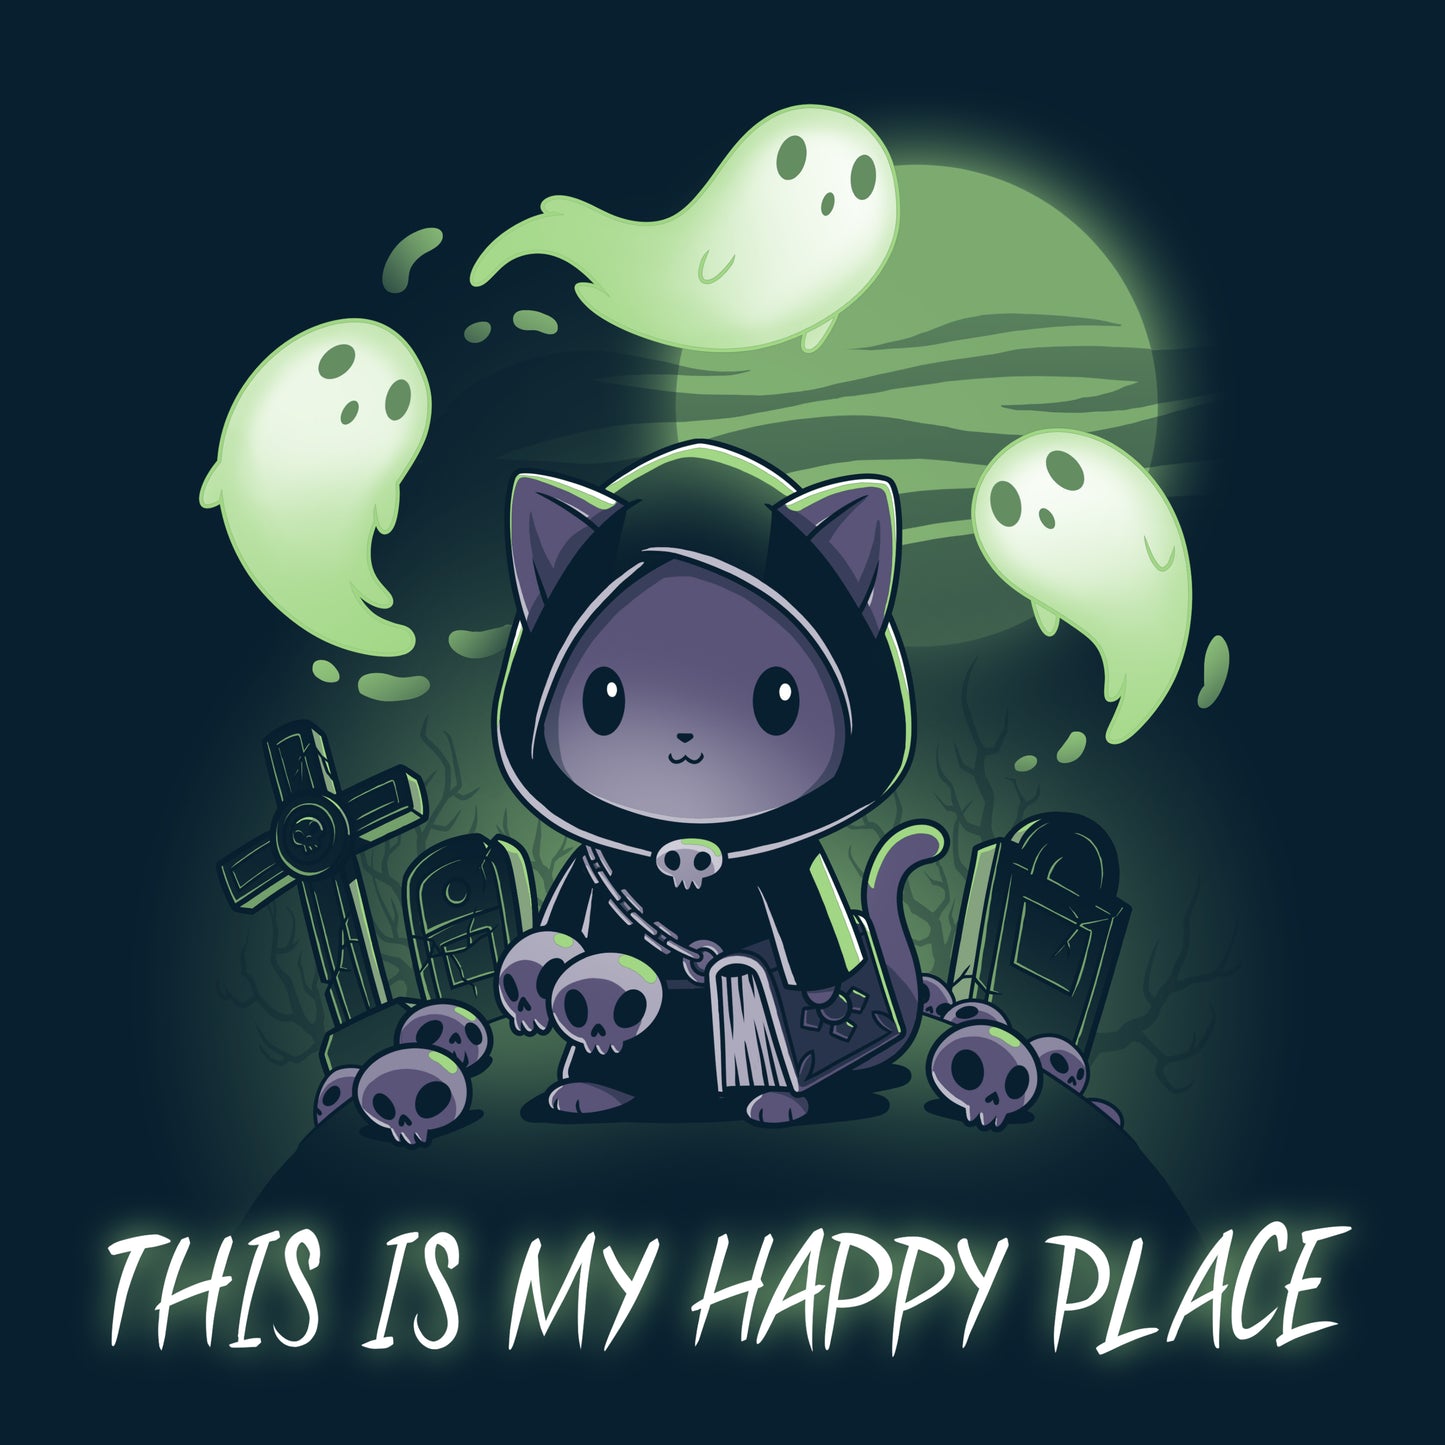 This is my Graveyards are My Happy Place ghostly adventure by TeeTurtle.